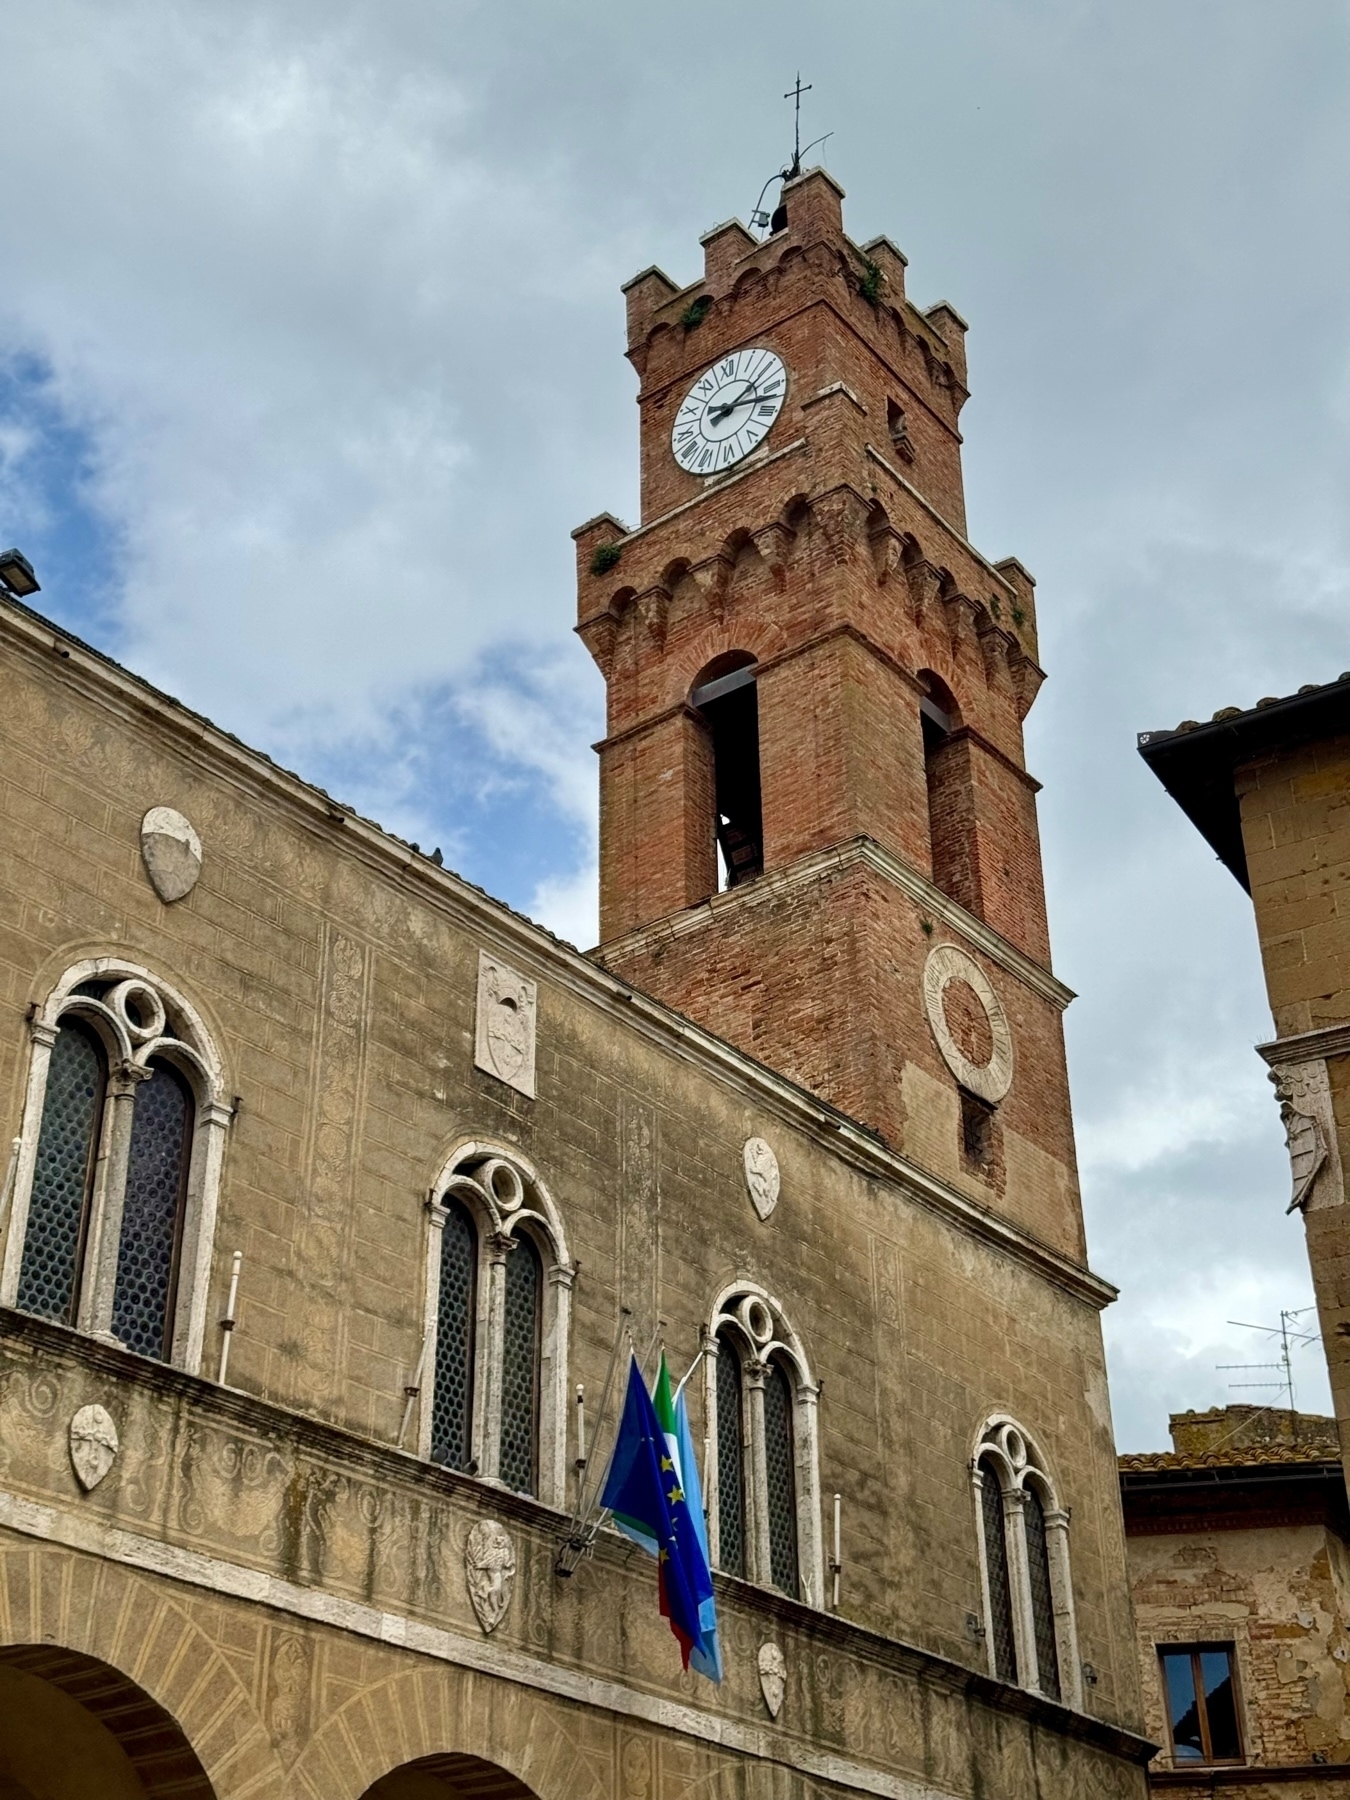 A historic clock tower made of red brick, featuring a white clock face, is attached to an older stone building with arched windows. The building displays Italian and European Union flags. The sky is partly cloudy.